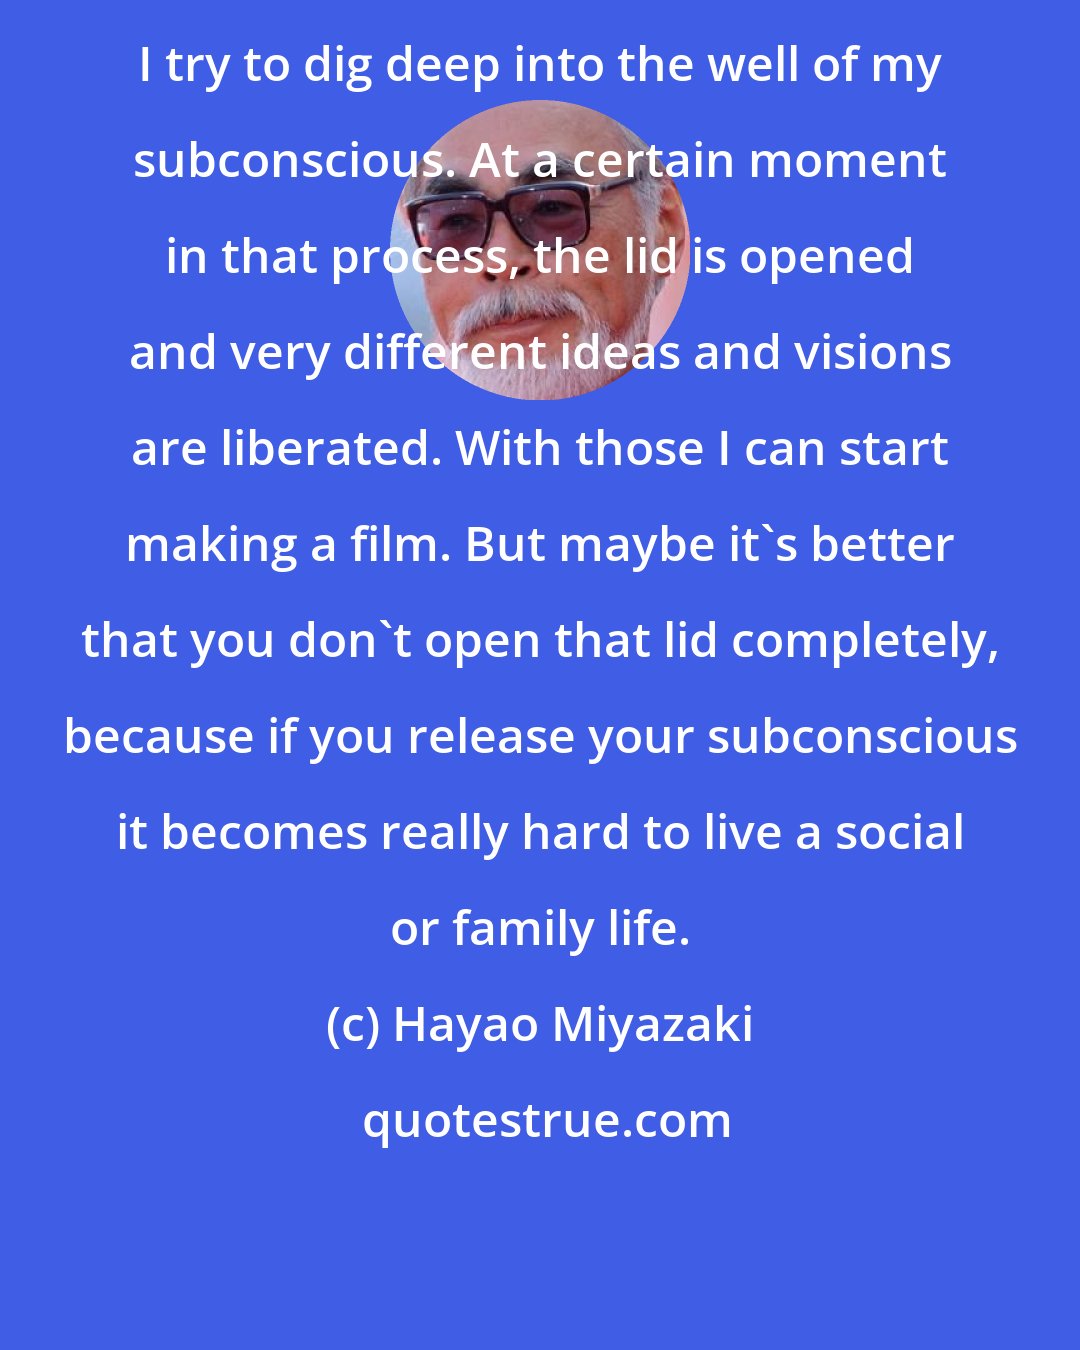 Hayao Miyazaki: I try to dig deep into the well of my subconscious. At a certain moment in that process, the lid is opened and very different ideas and visions are liberated. With those I can start making a film. But maybe it's better that you don't open that lid completely, because if you release your subconscious it becomes really hard to live a social or family life.